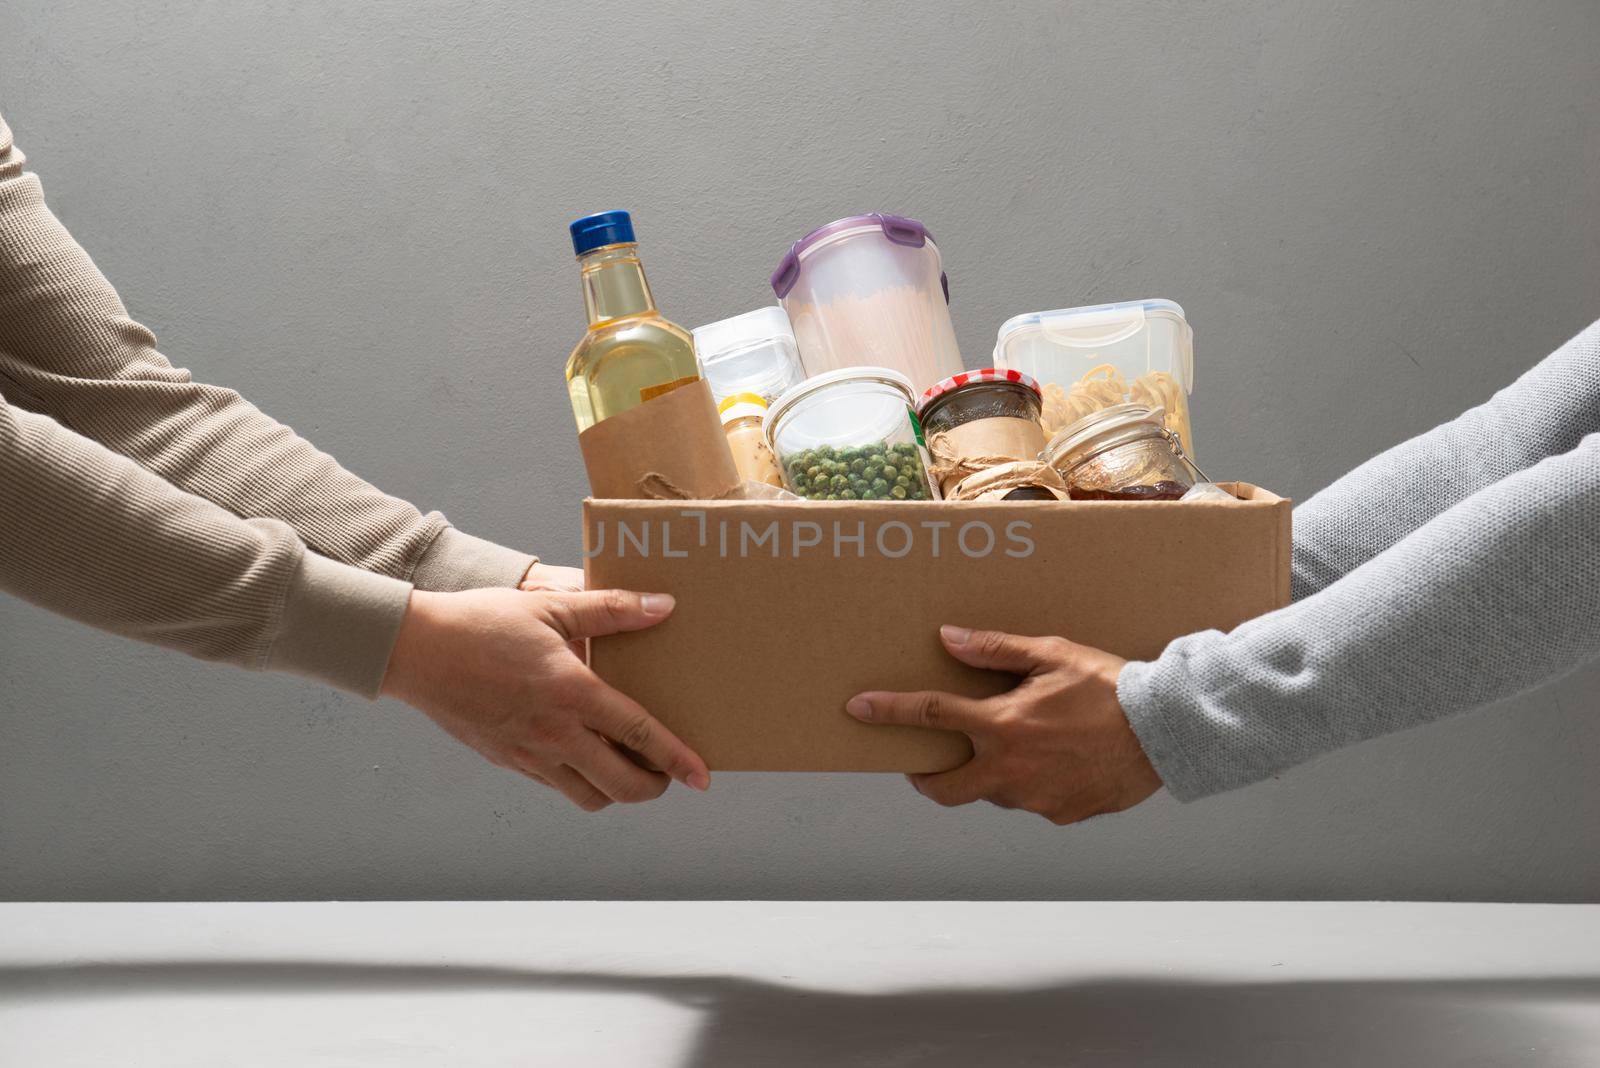 Volunteers with donation box with foodstuffs on grey background